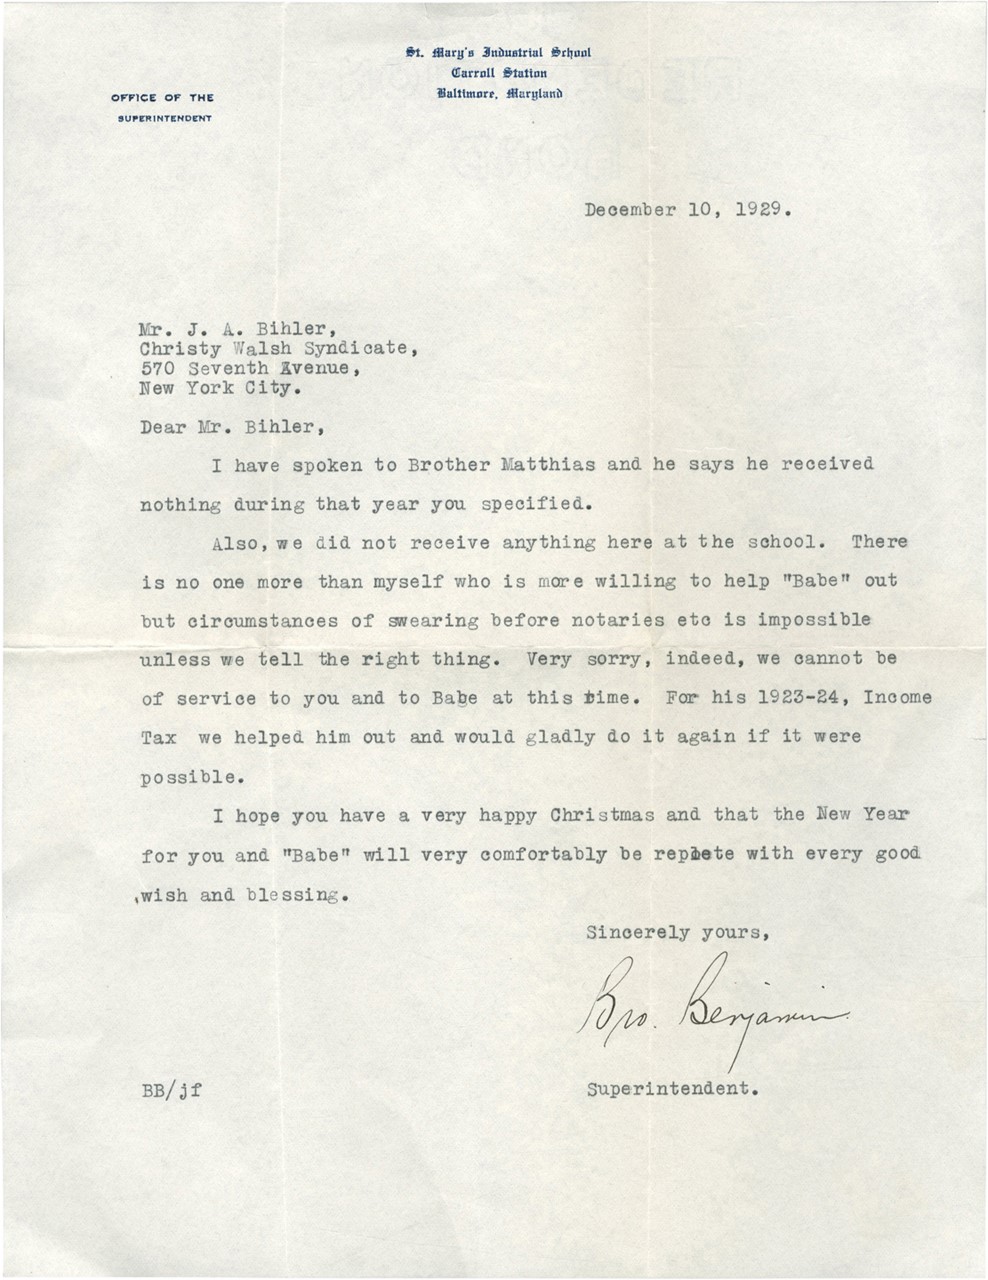 Ruth and Gehrig - 1929 St. Mary's Brother Mathias Won't Lie to Save Babe Ruth from Tax Problems Letter